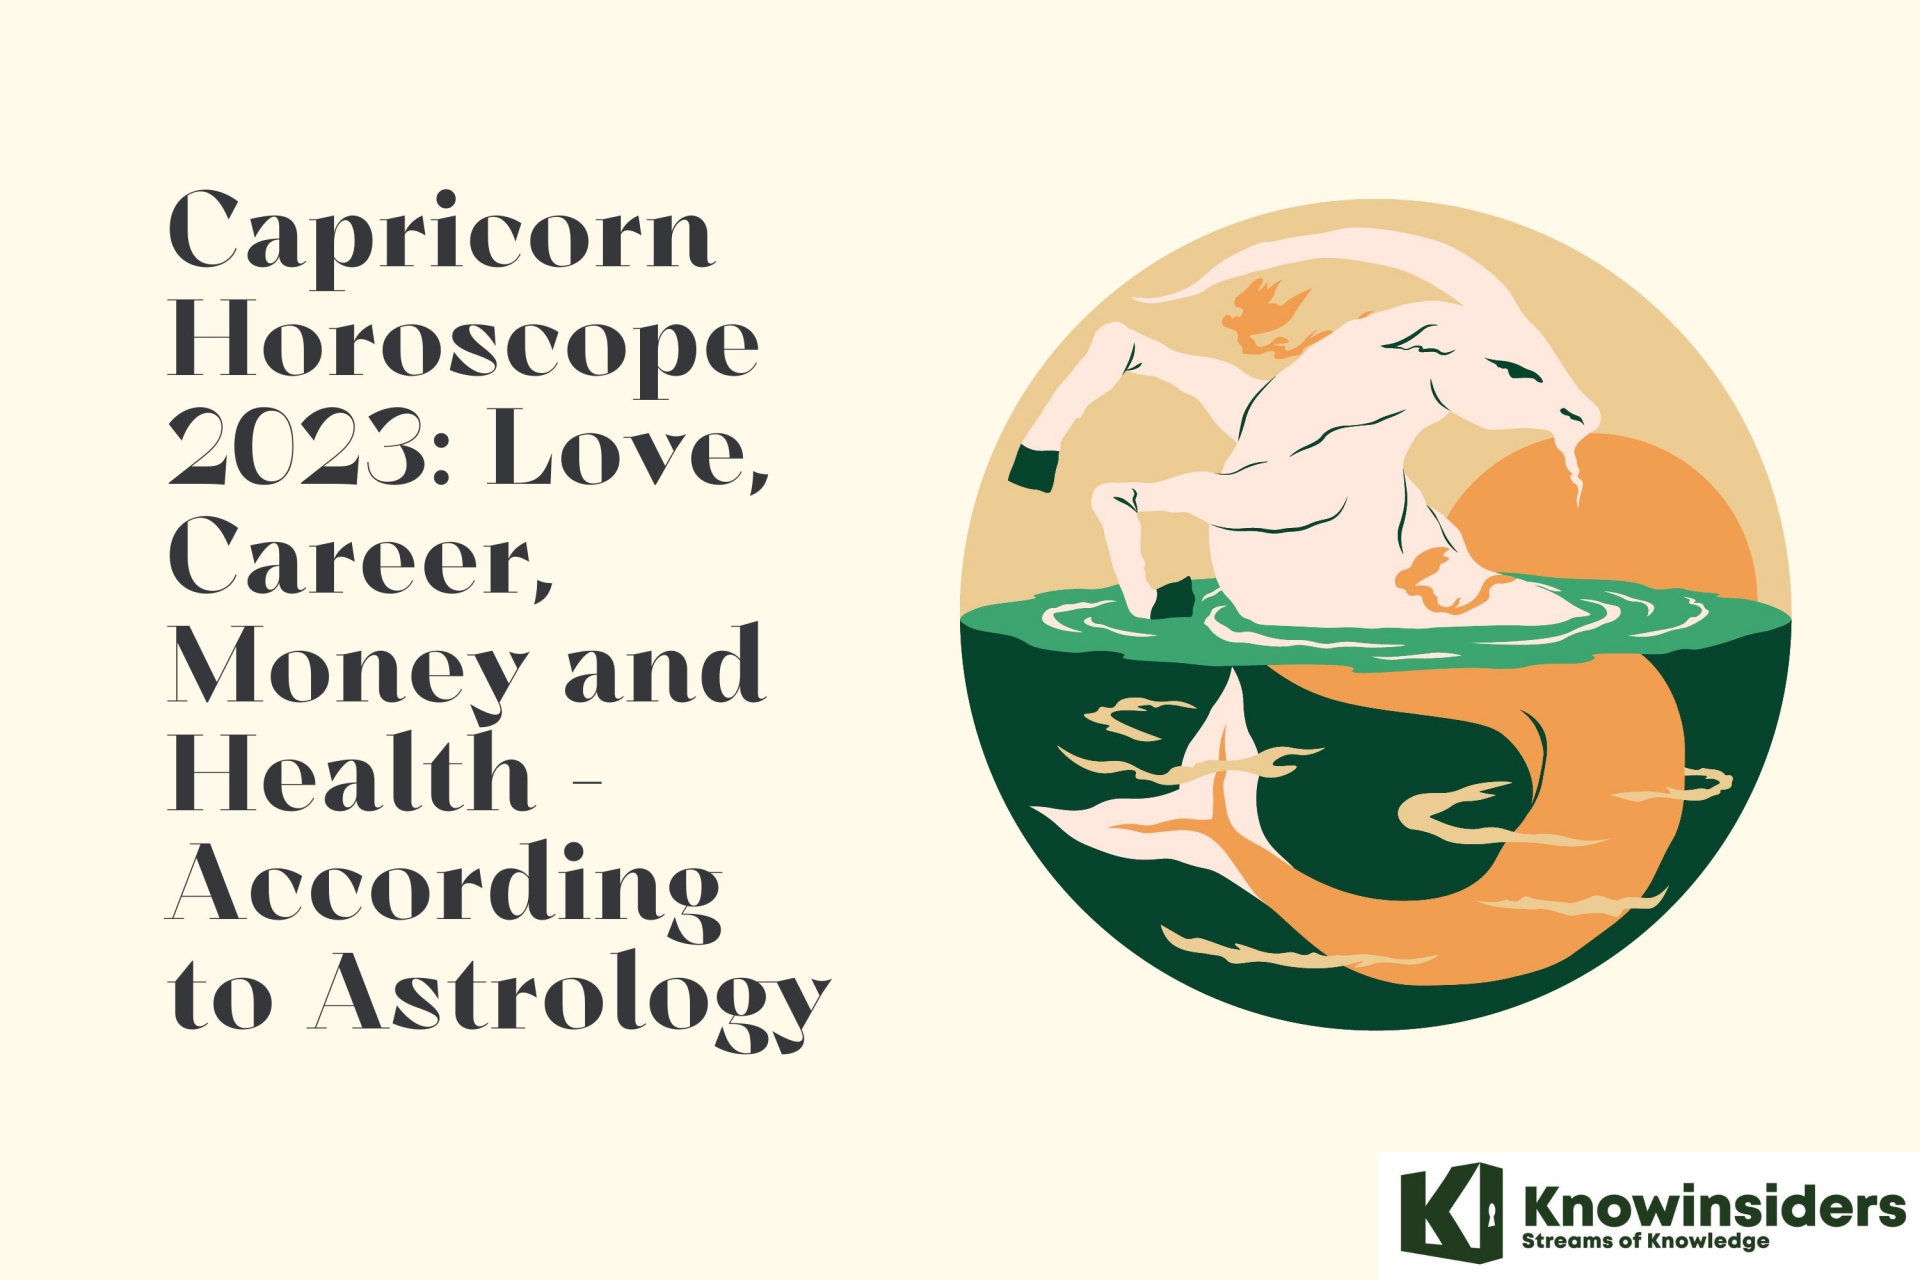 Capricorn Horoscope 2023 Love, Career, Money and Health According to Astrology KnowInsiders